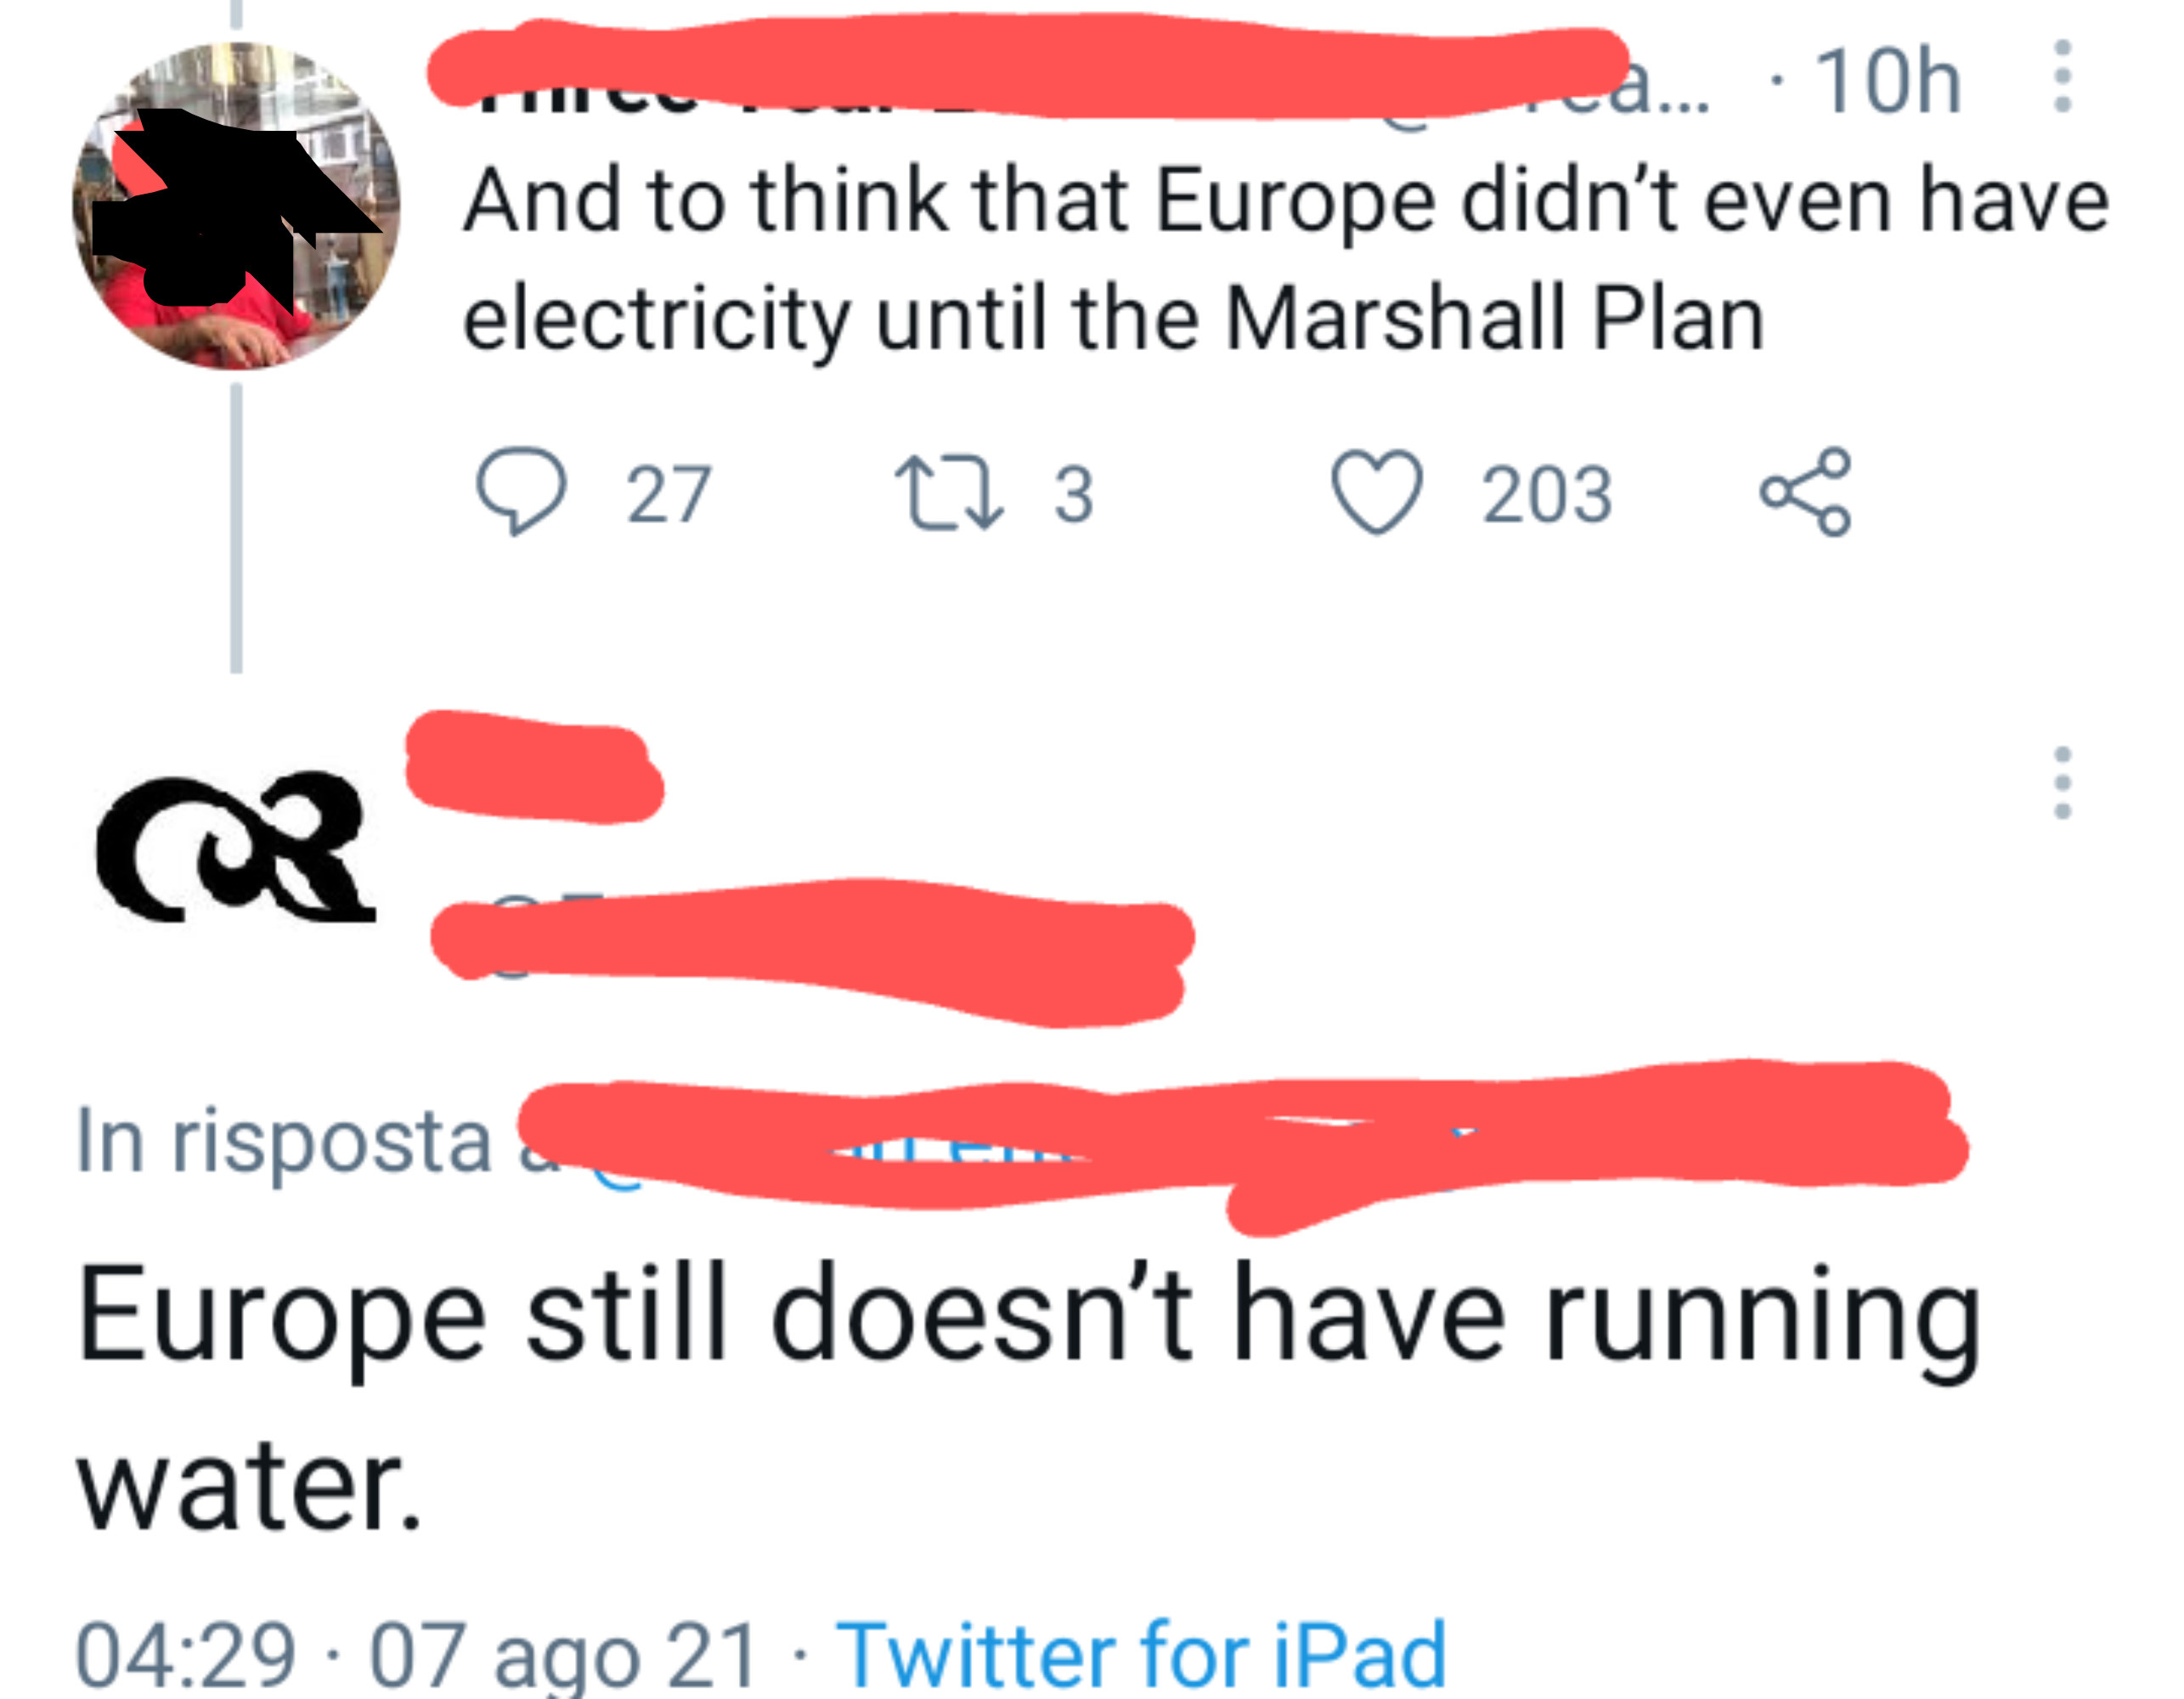 person who does not think europe has running water